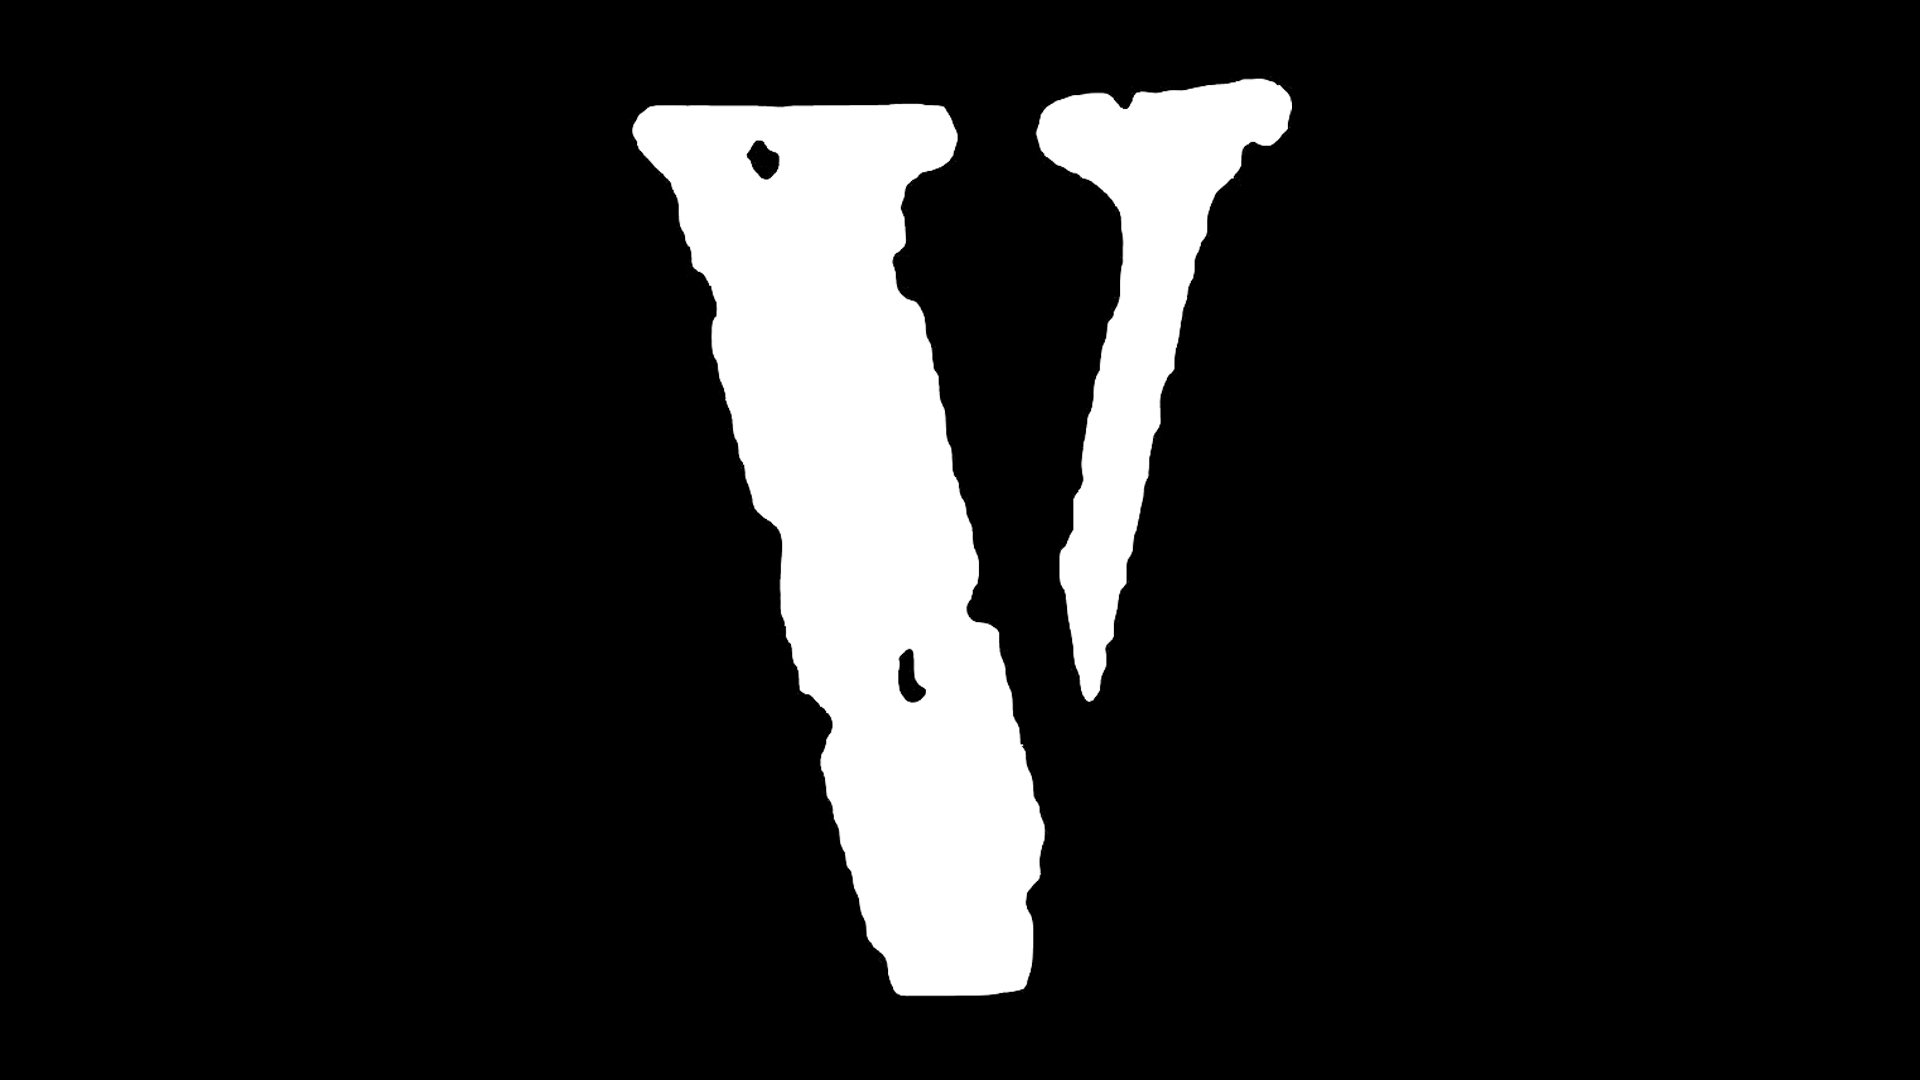 Vlone logo and symbol, meaning, history, PNG